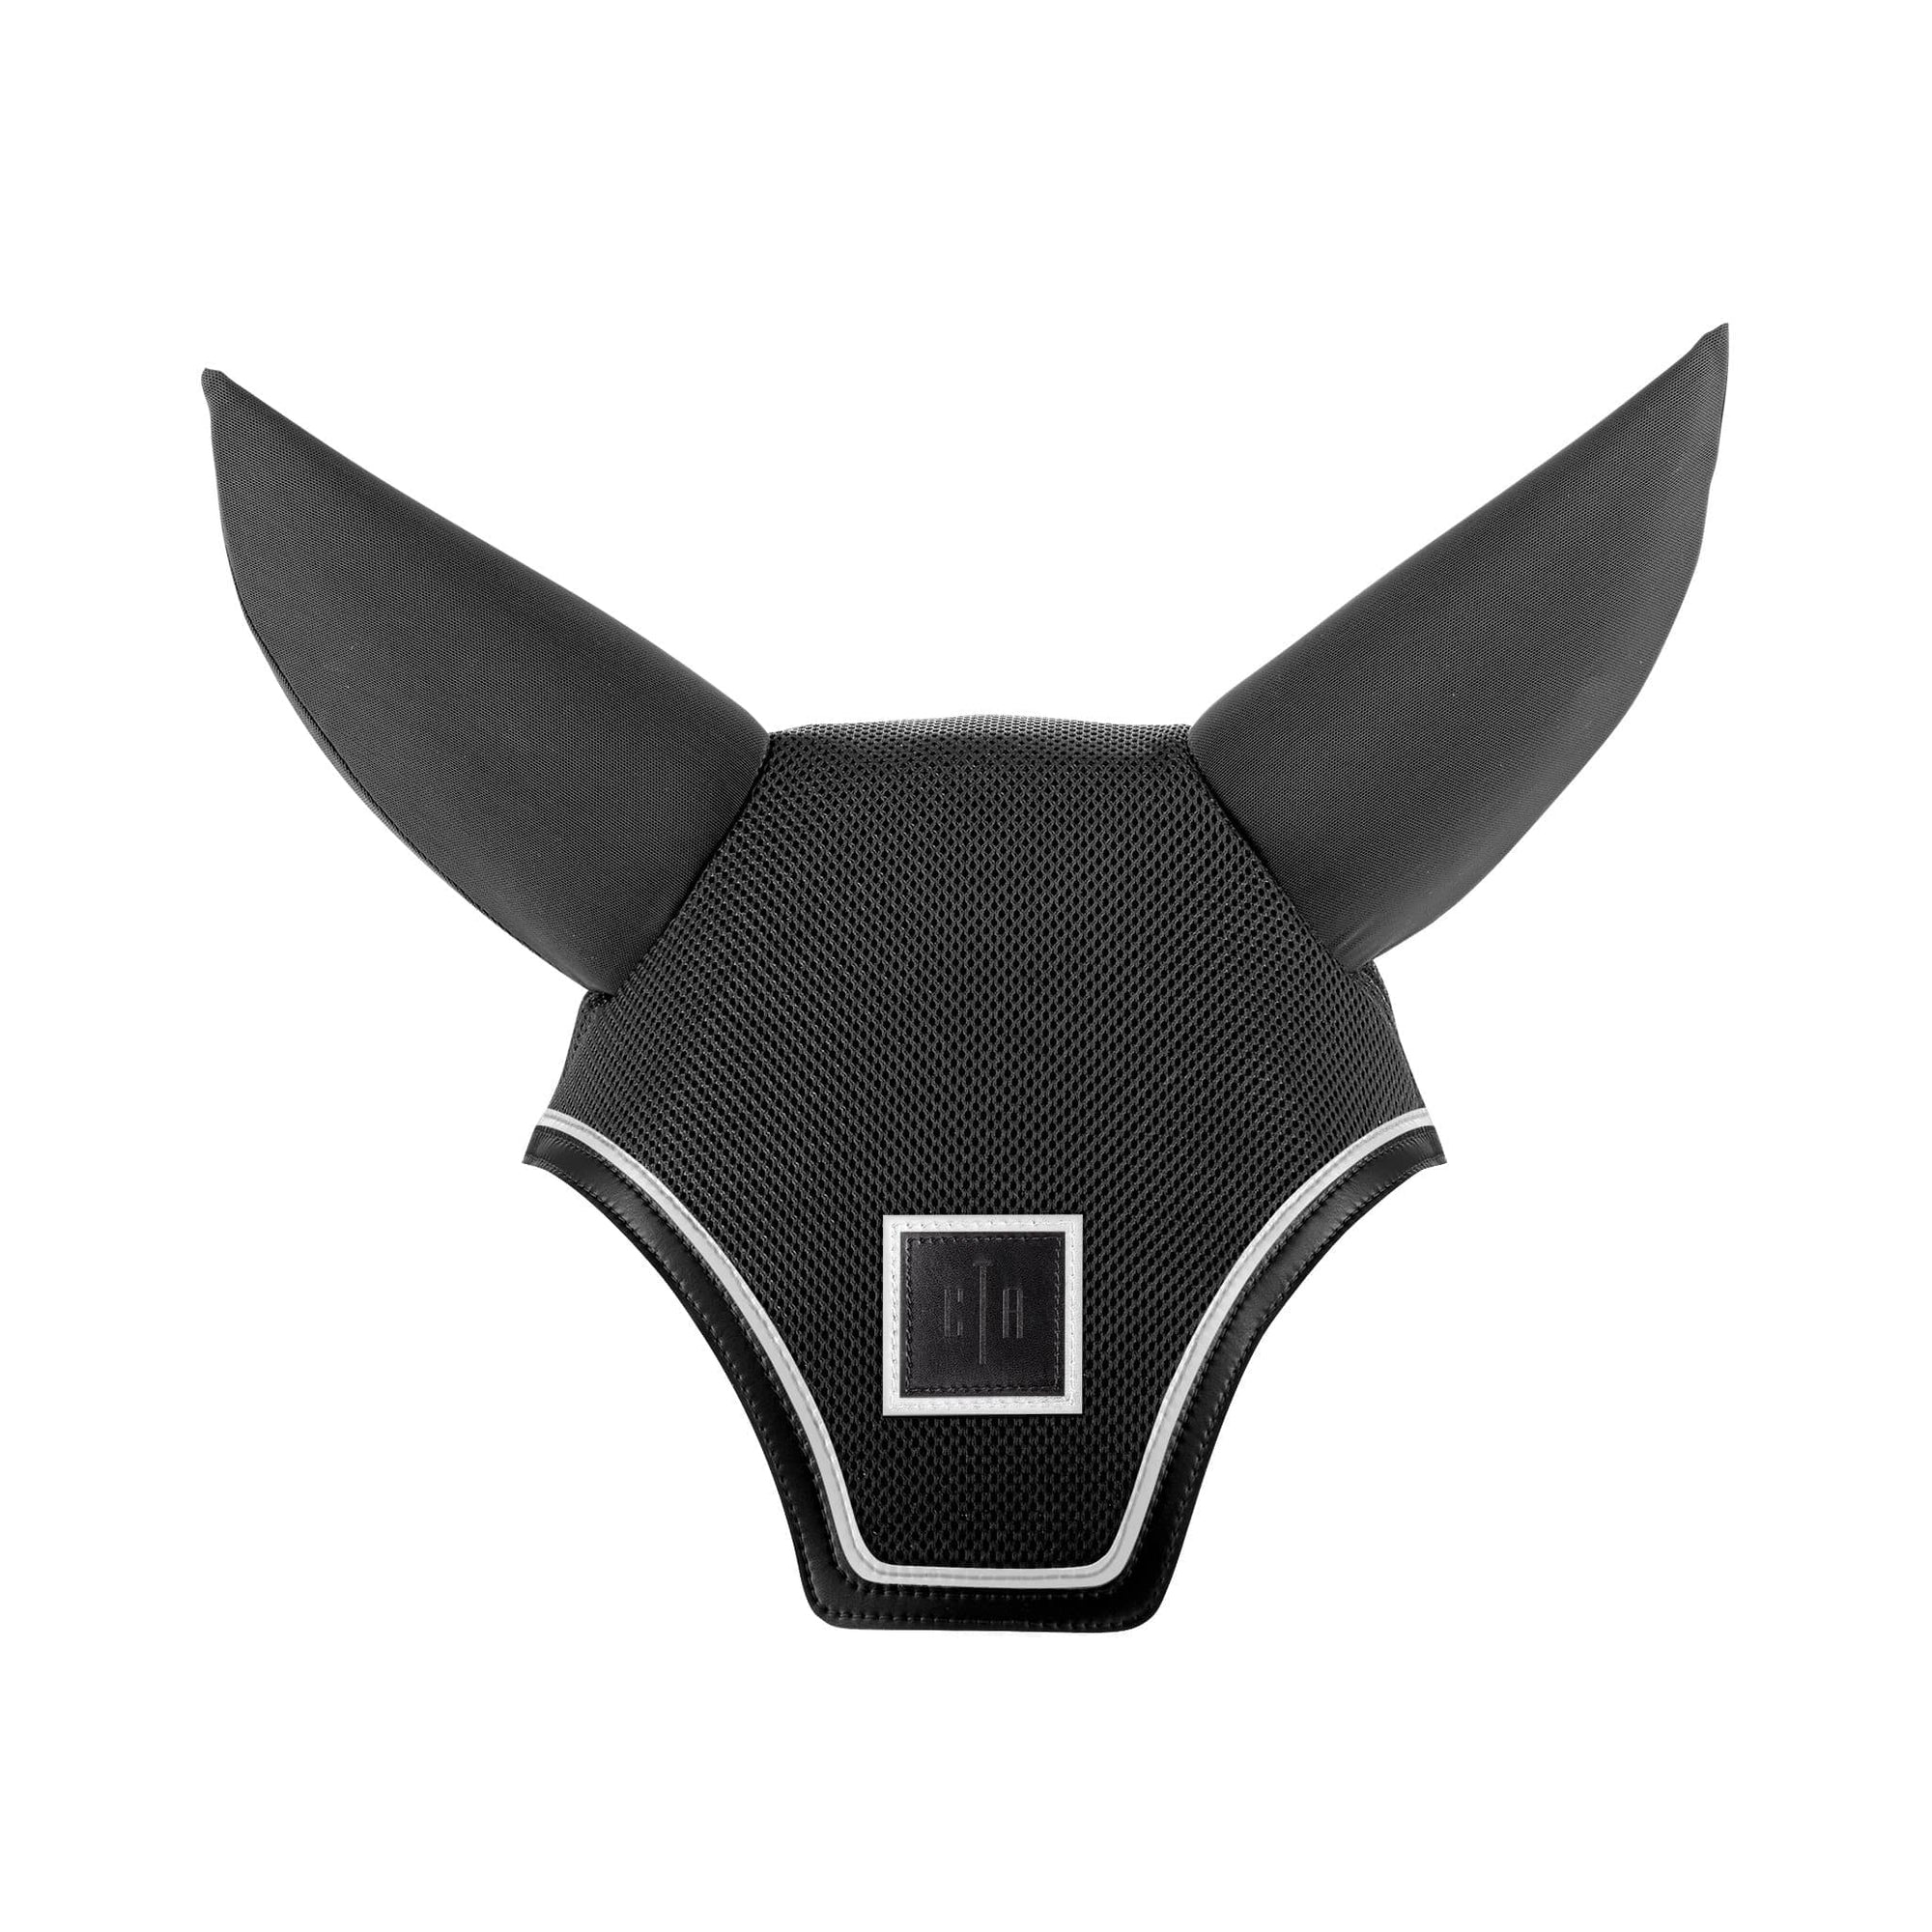 Custom SilentFit Ear Bonnet with open cell foam technology allows sound to bounce around instead of cutting straight through as in traditional closed cell foams, allowing for a greater reduction of noise.